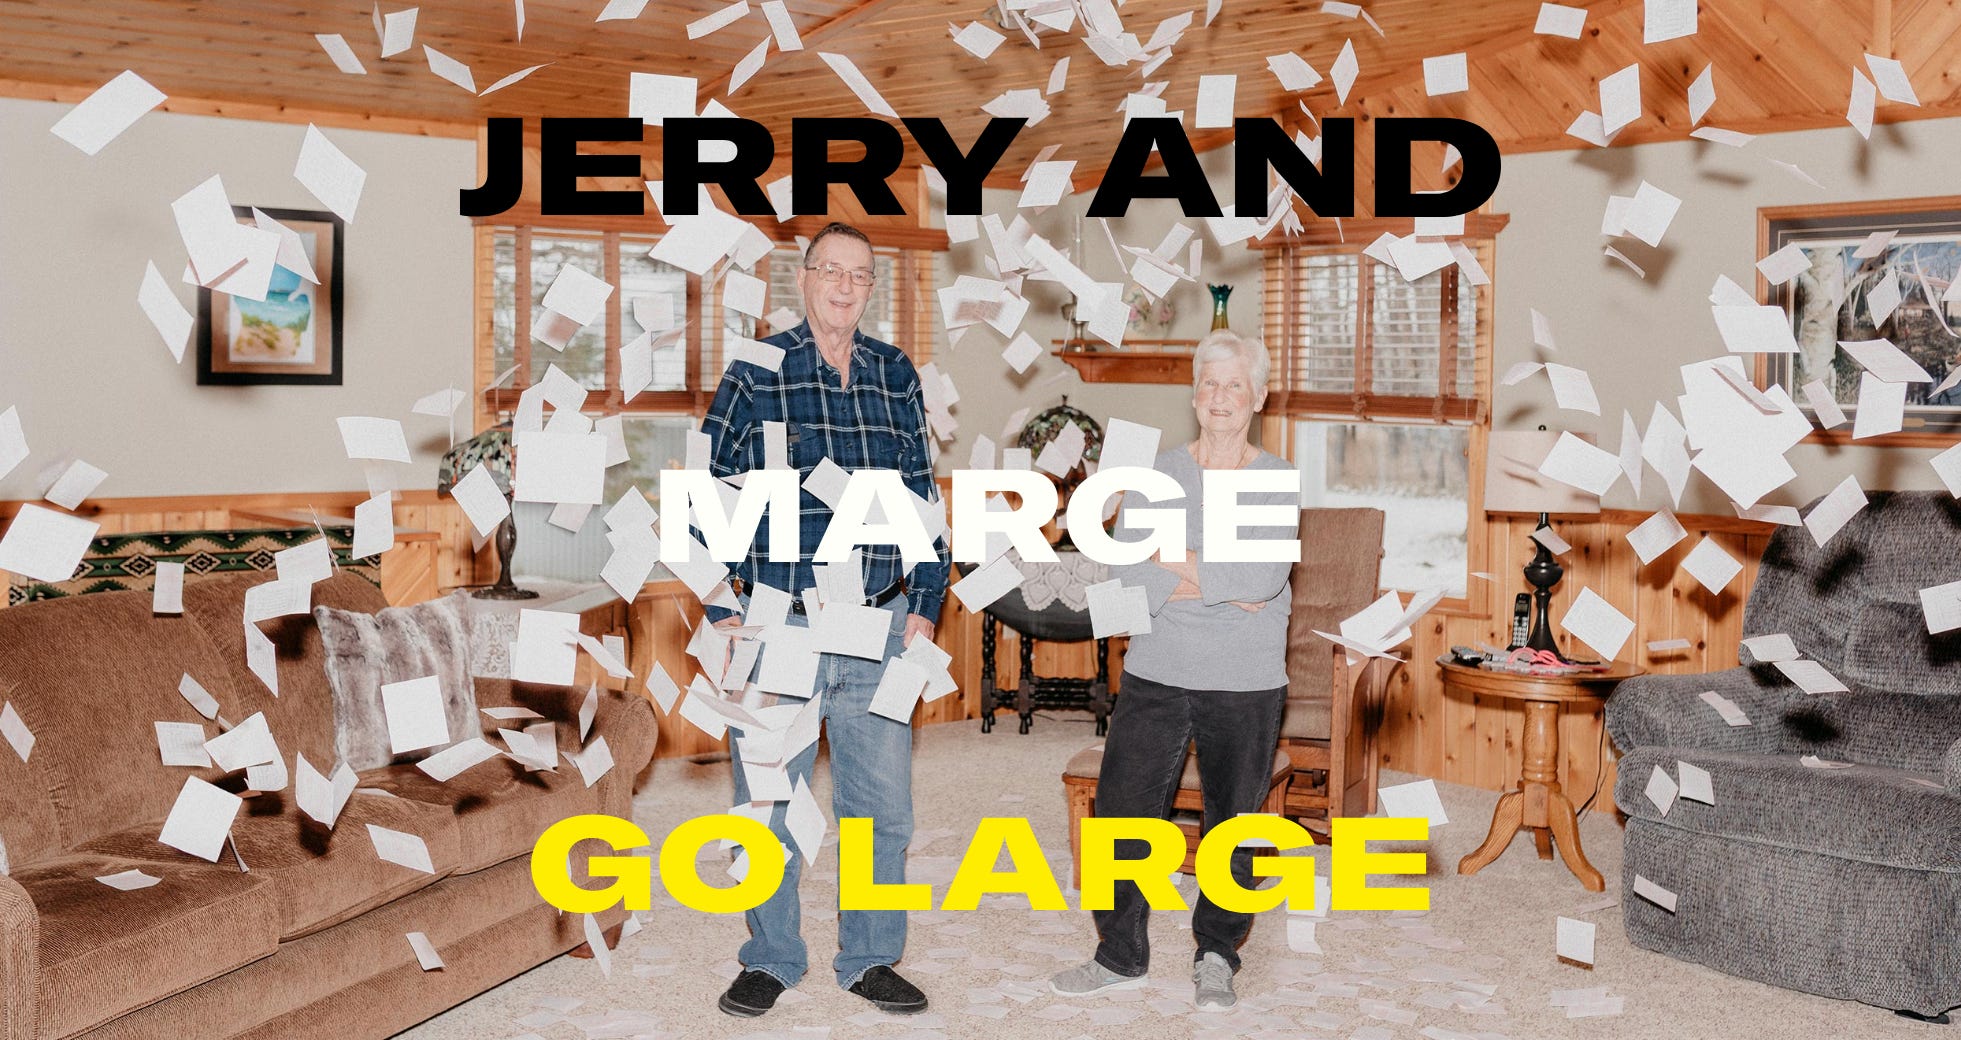 It's July! Let's read and discuss “Jerry and Marge Go Large,” by Jason Fagone - by Mark Isero - Article Club